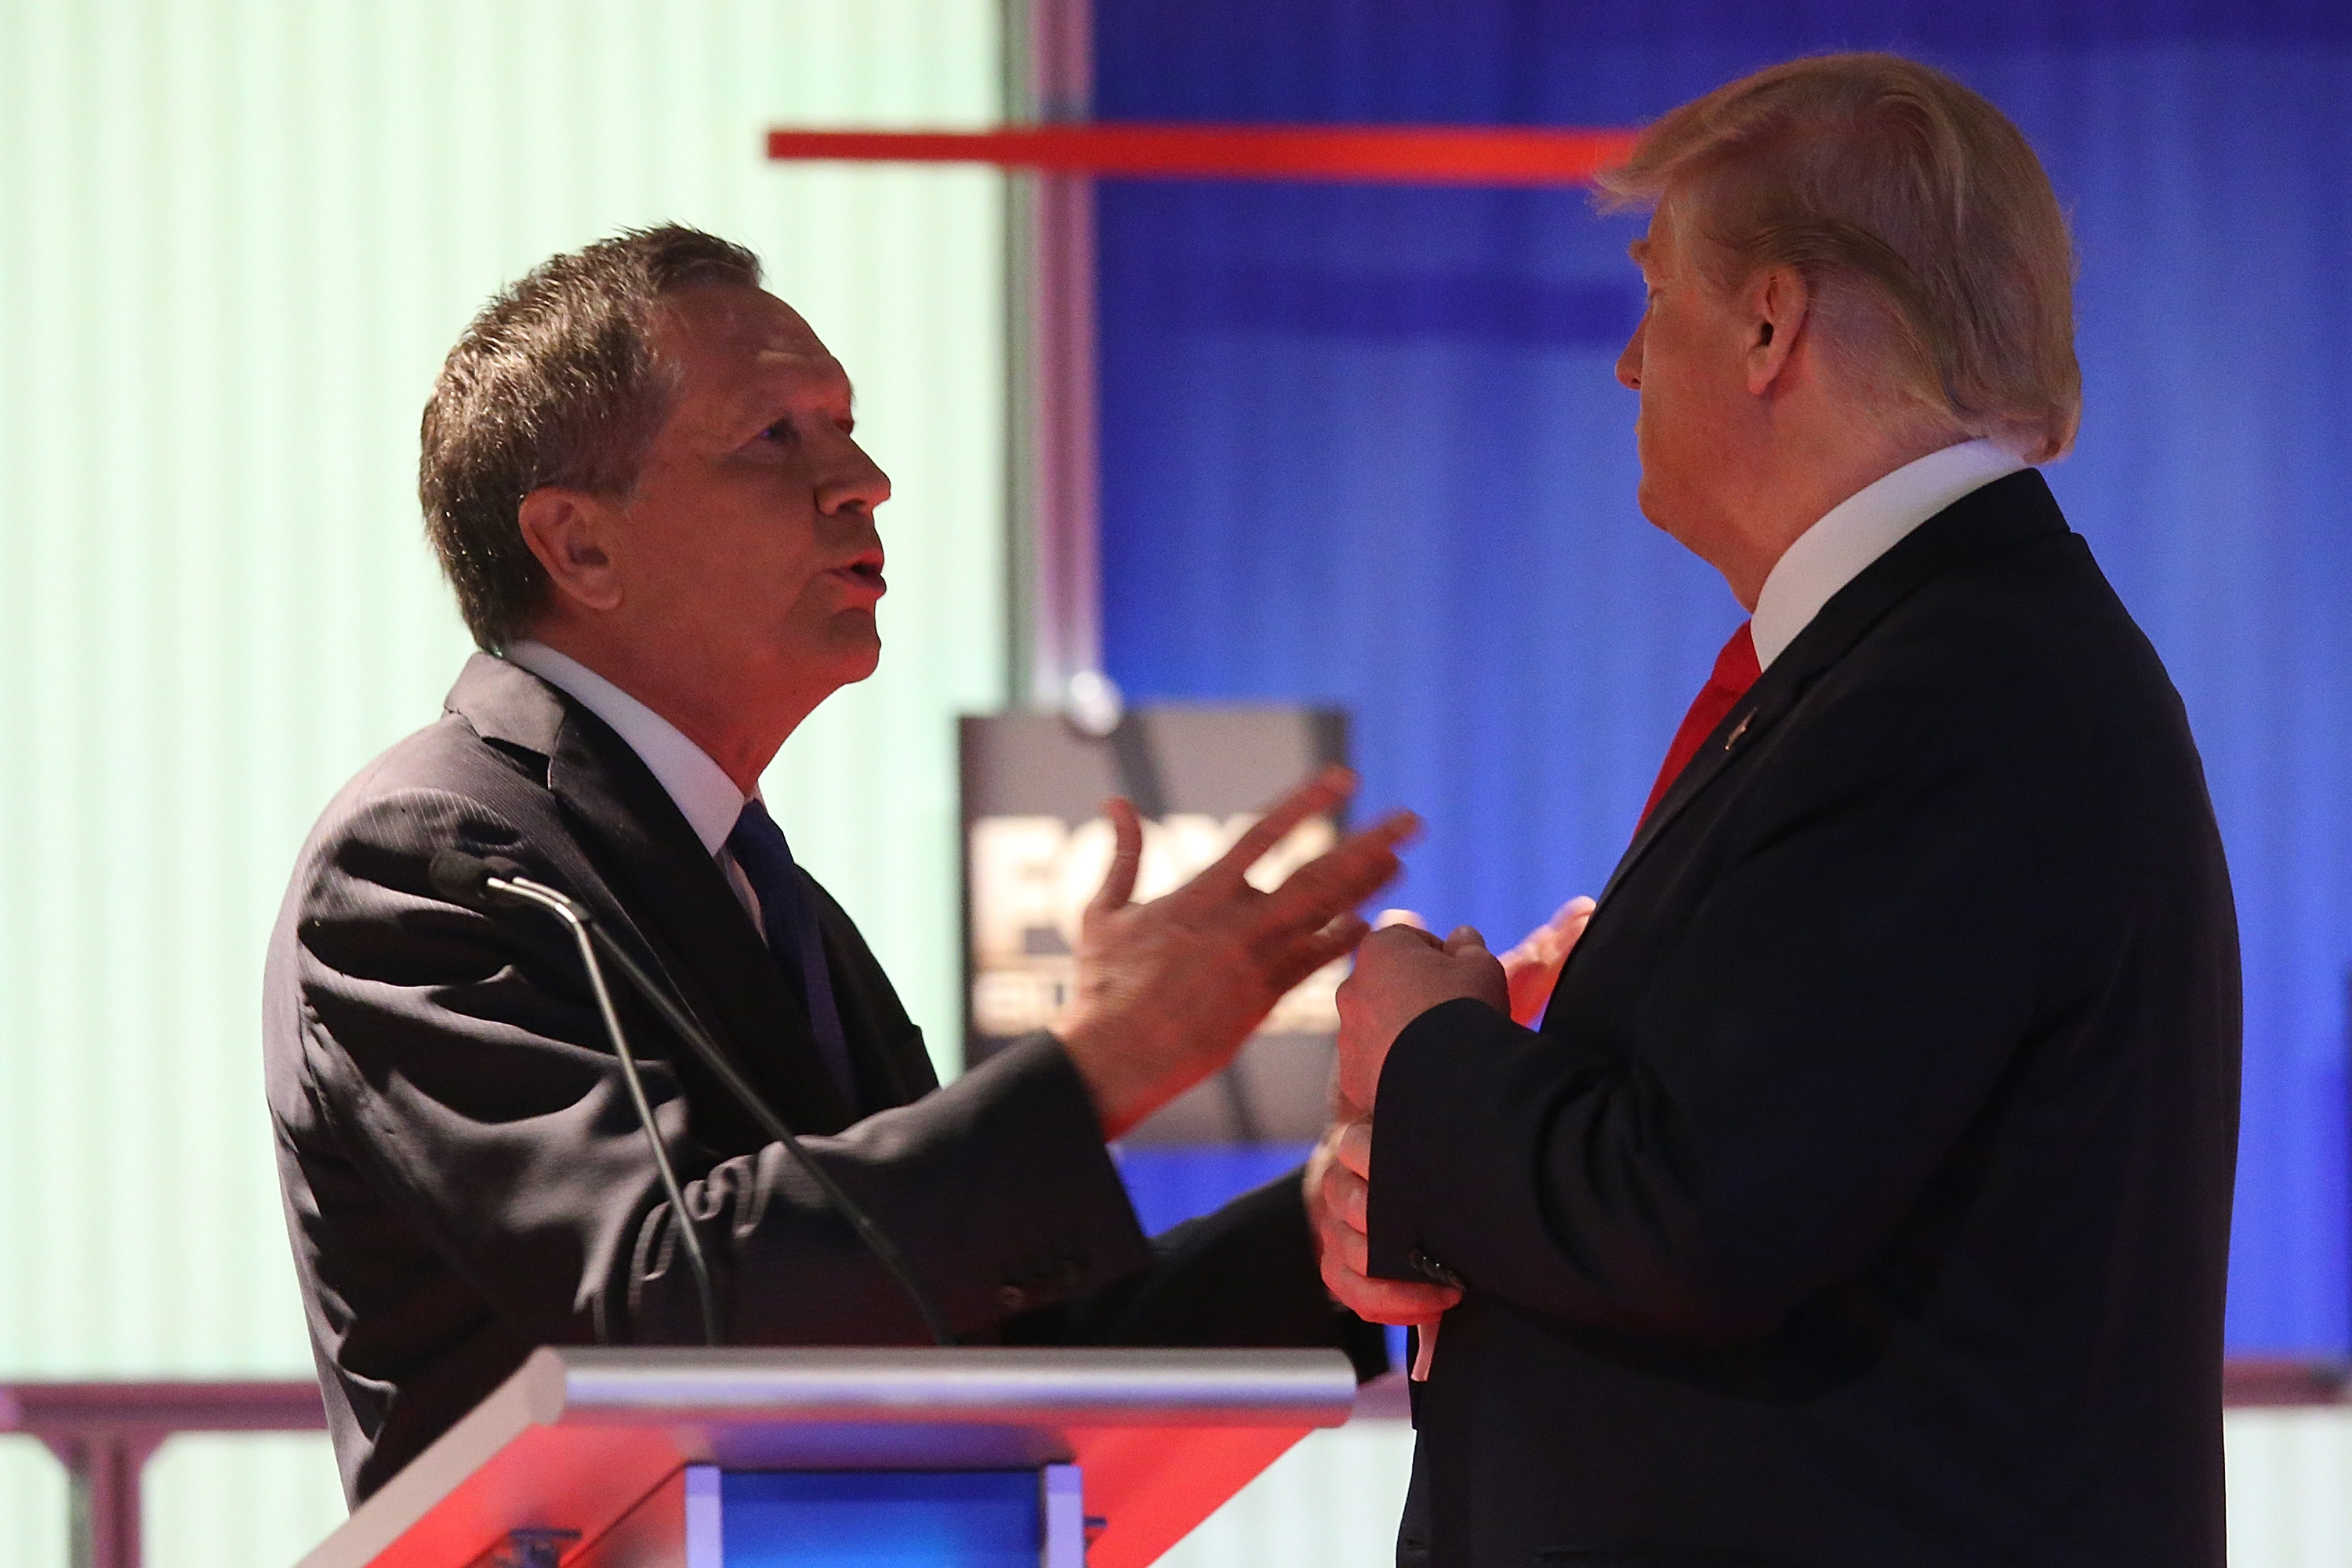 Ohio Gov. John Kasich and Donald Trump talk during a commercial break during the Fox Business Network Republican presidential debate at the North Charleston Coliseum and Performing Arts Center on January 14, 2016, in North Charleston, South Carolina.